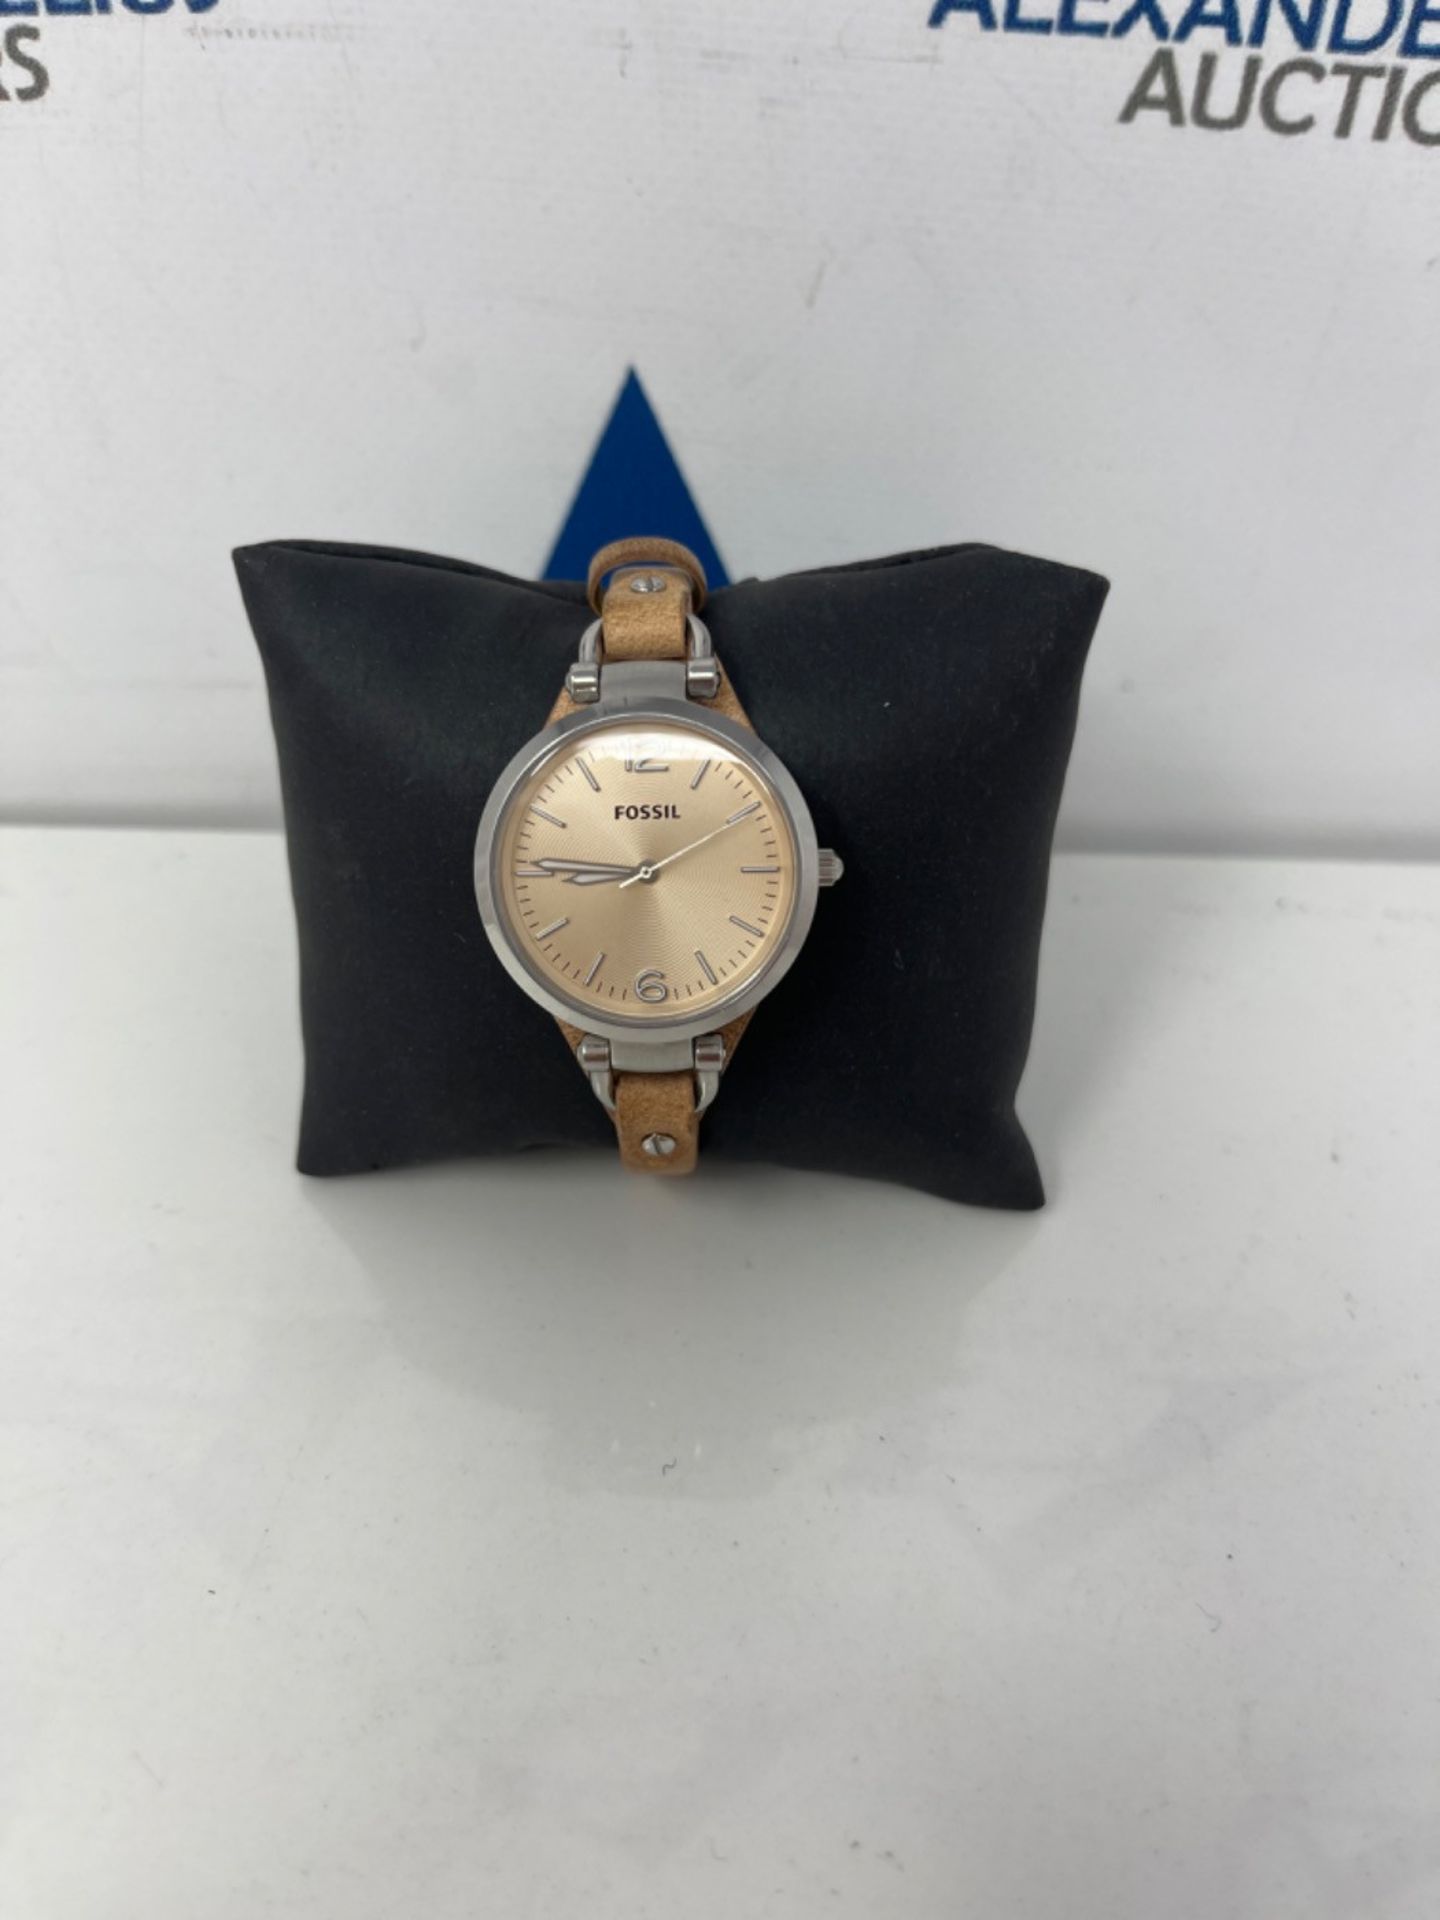 RRP £79.00 FOSSIL Womens Watch Georgia, 32mm case size, Quartz movement, Leather strap - Image 2 of 3